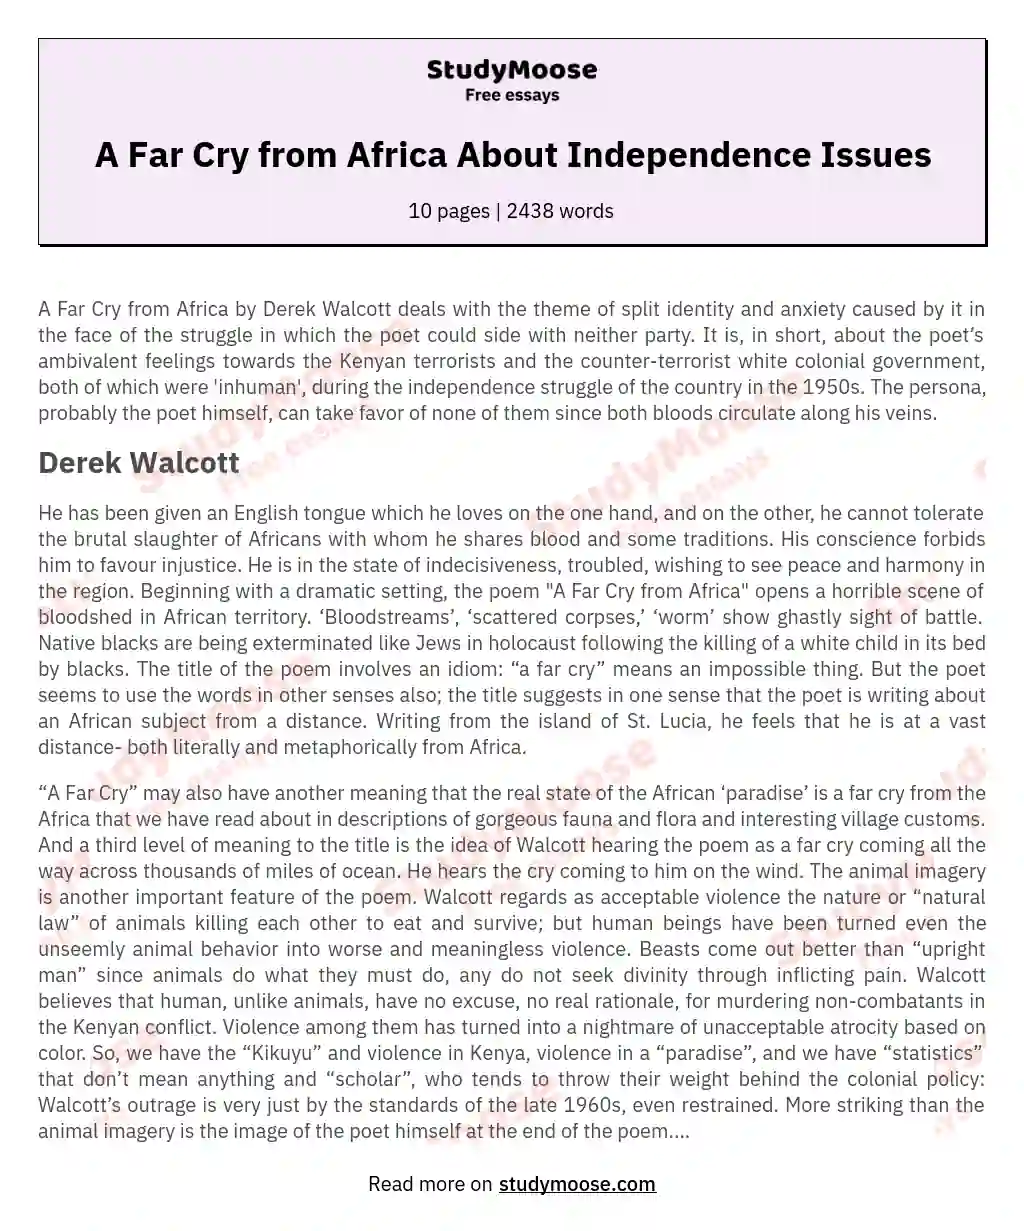 A Far Cry from Africa About Independence Issues essay